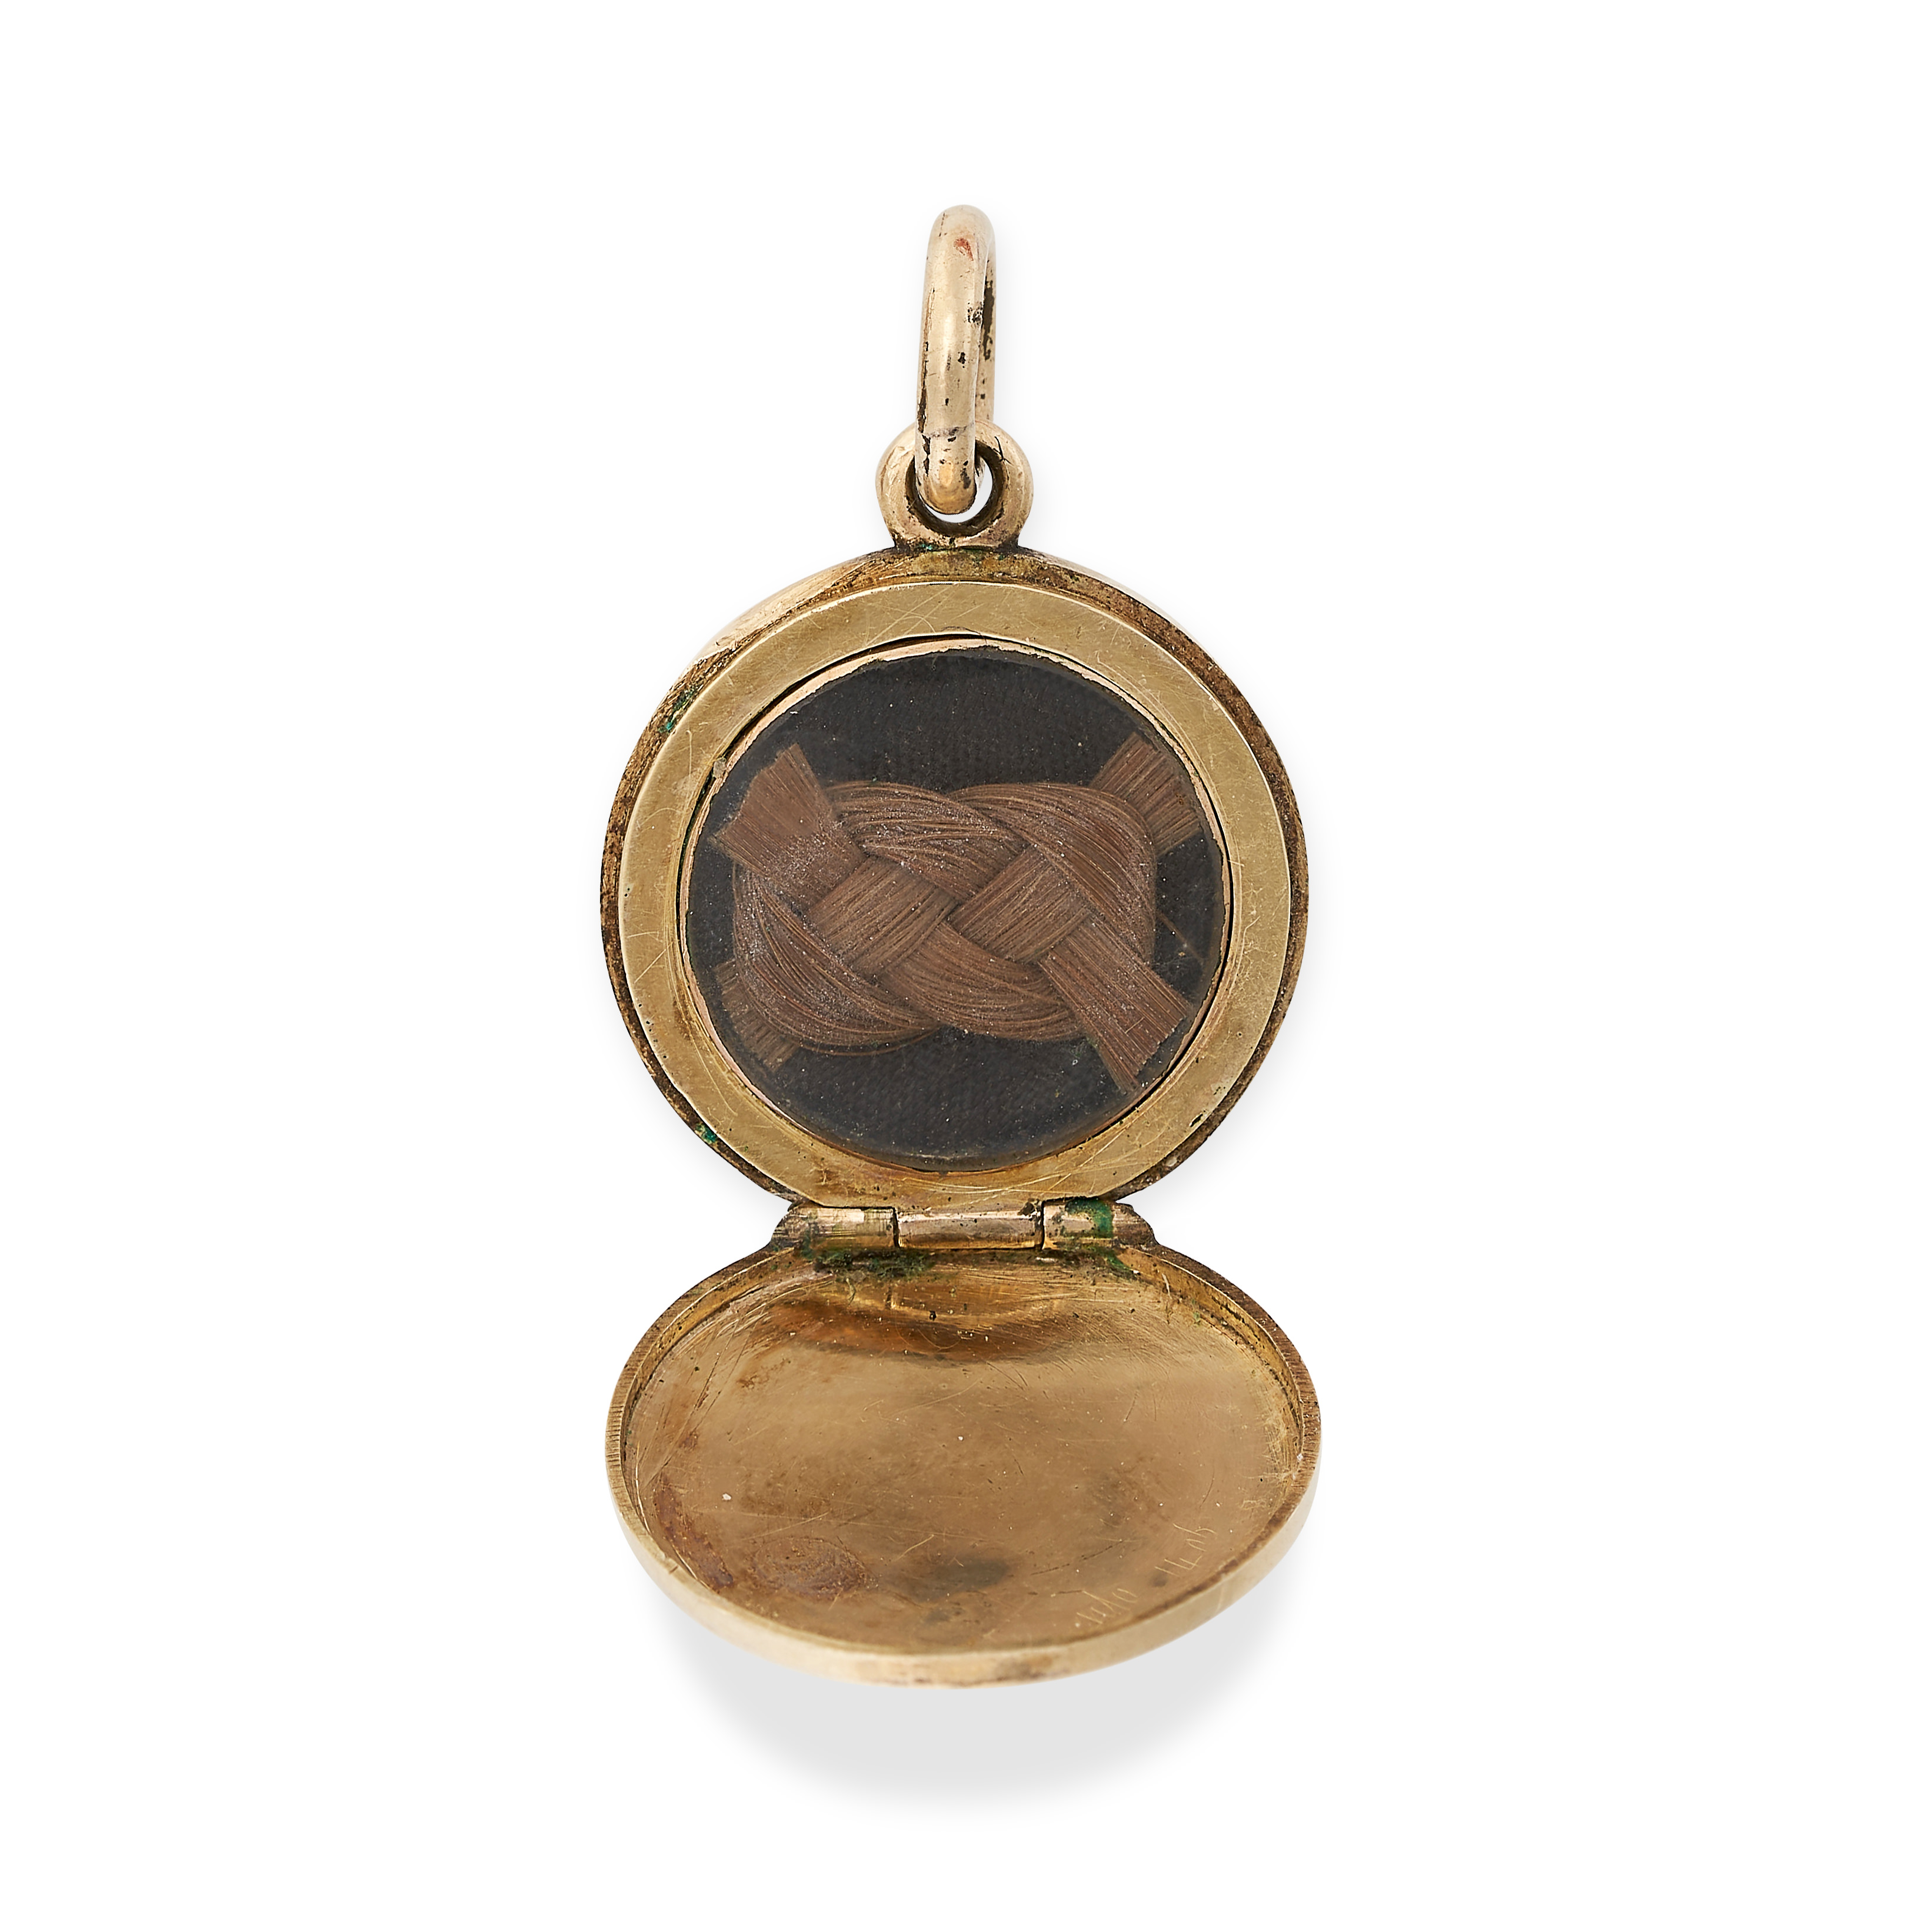 NO RESERVE - AN ANTIQUE VICTORIAN HAIRWORK MOURNING LOCKET PENDANT in yellow gold, circular shape - Image 2 of 3